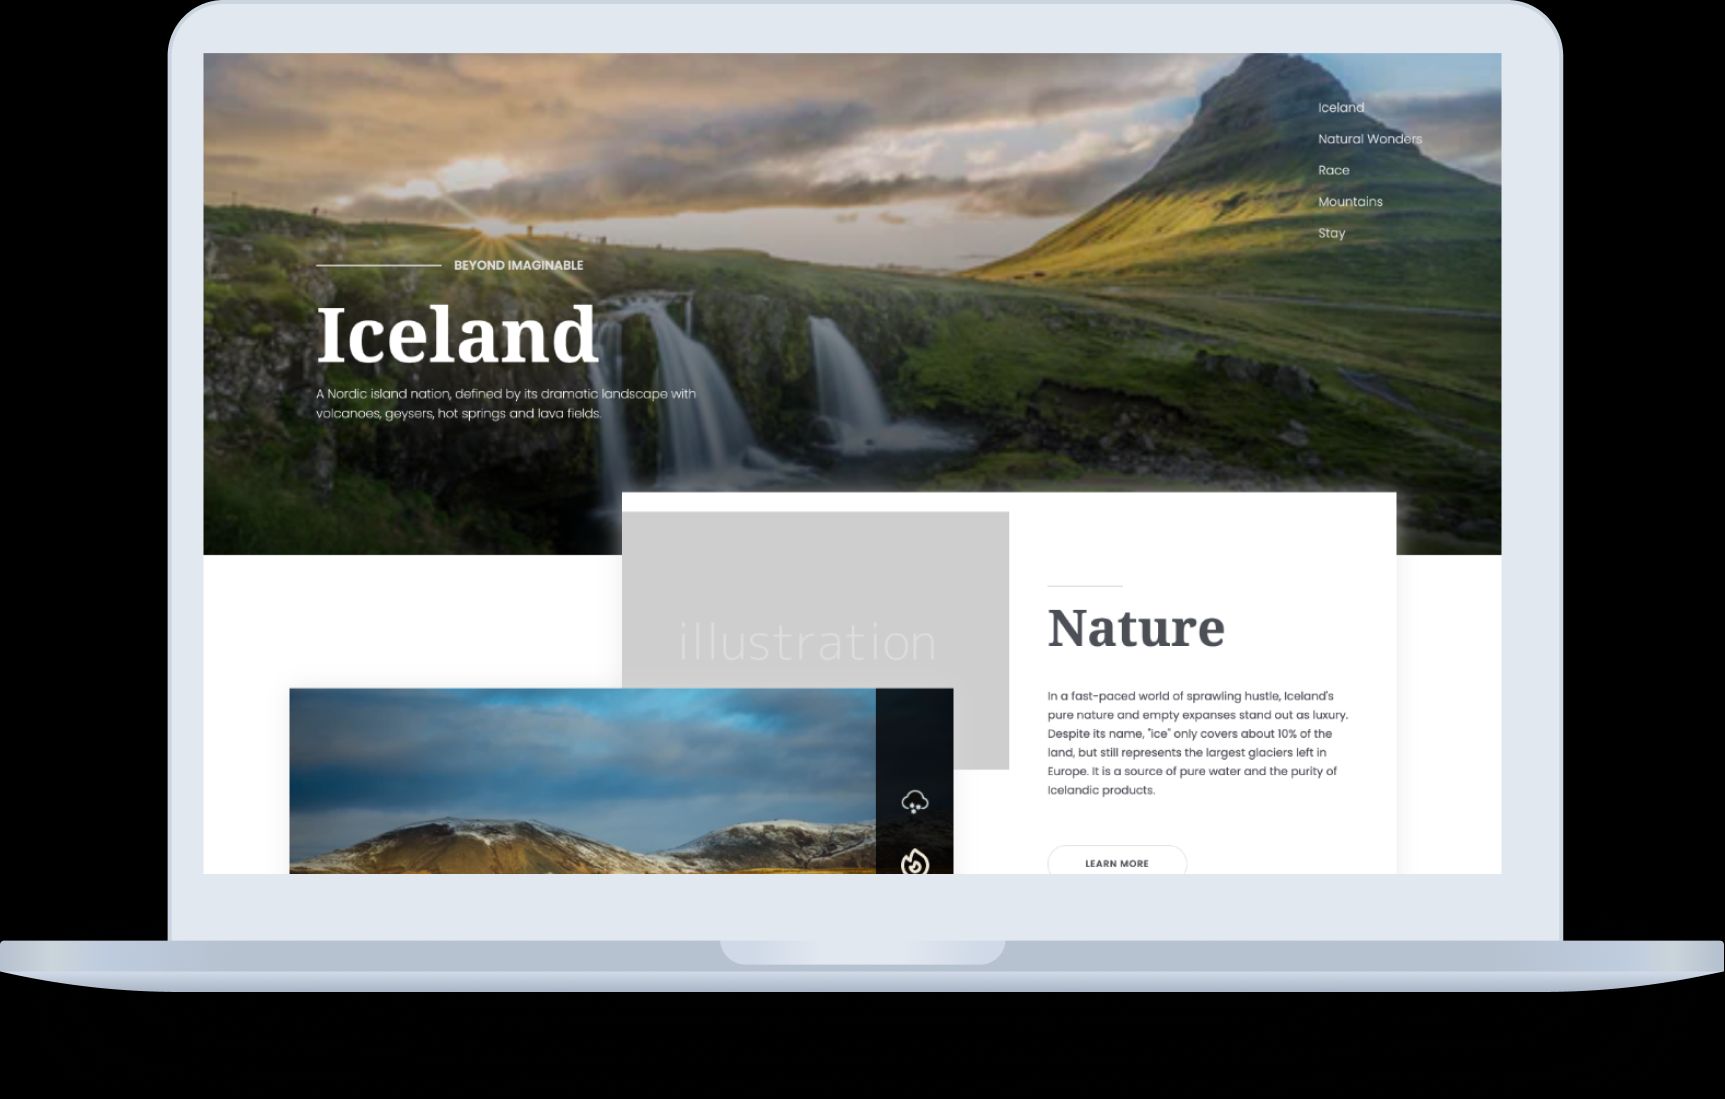 Fire & Ice landing page, with a navigation menu and Icelandic landscape images